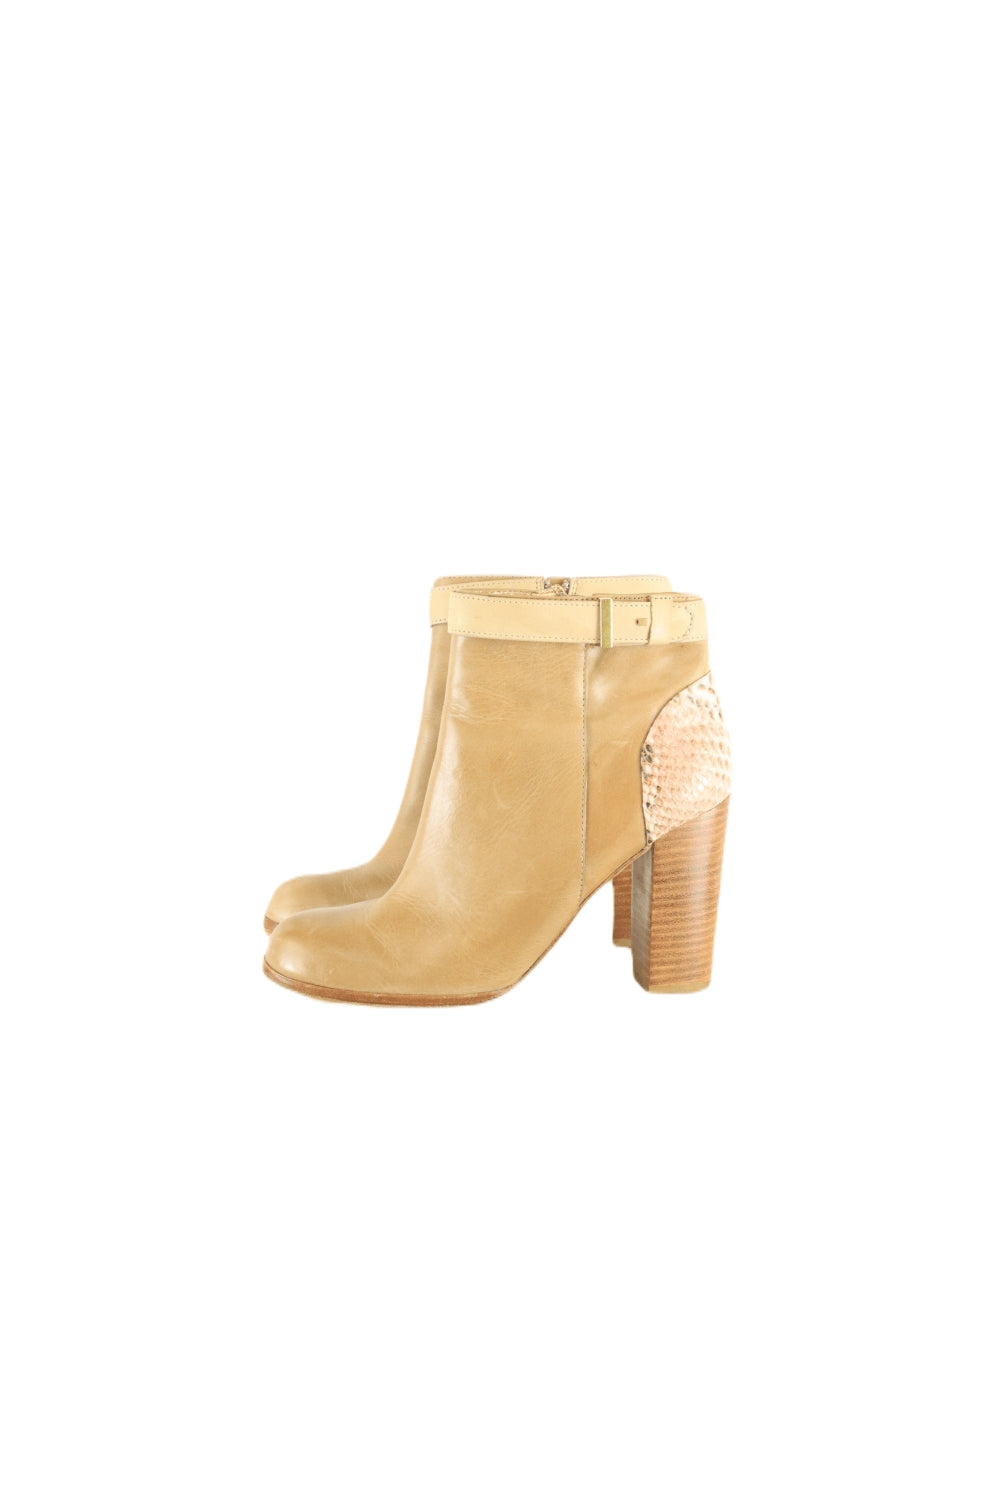 Mimco Tan Leather Ankle Boots 38